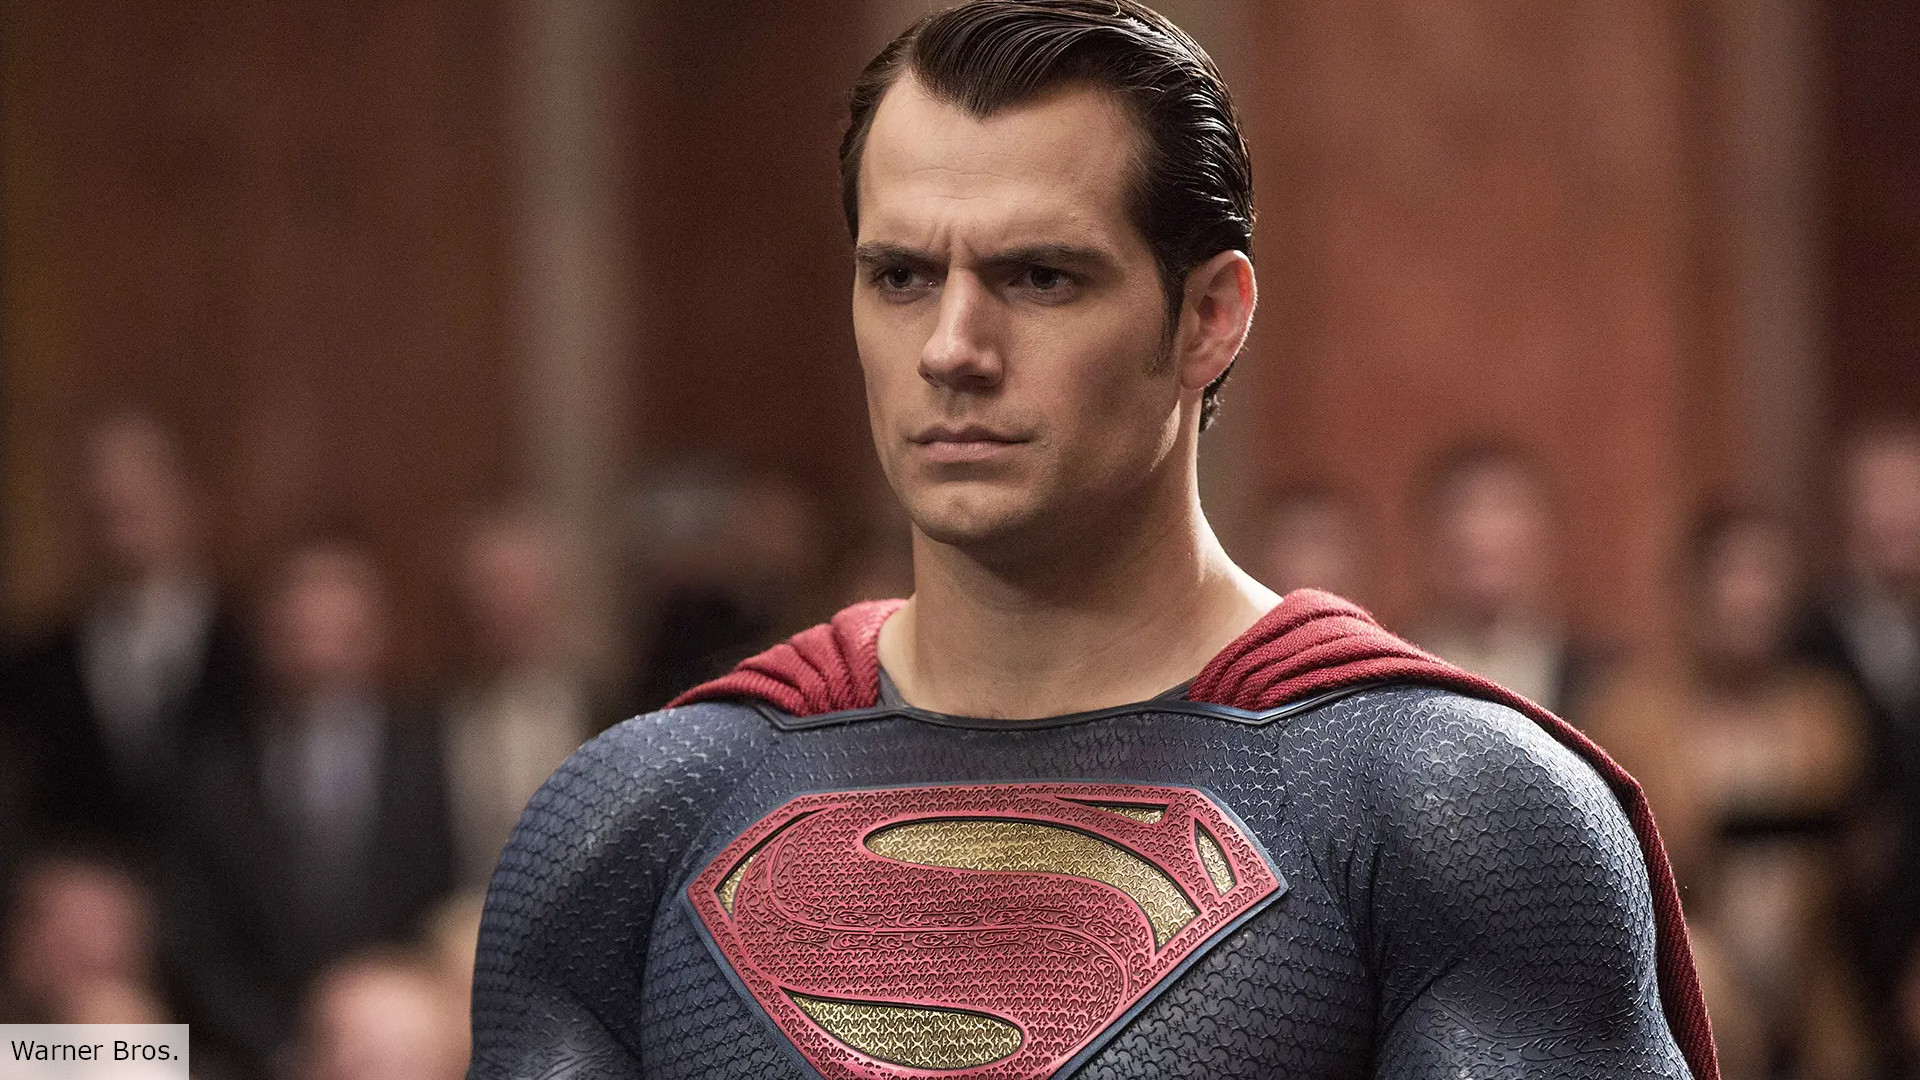 Who is the new Superman actor in DCU?